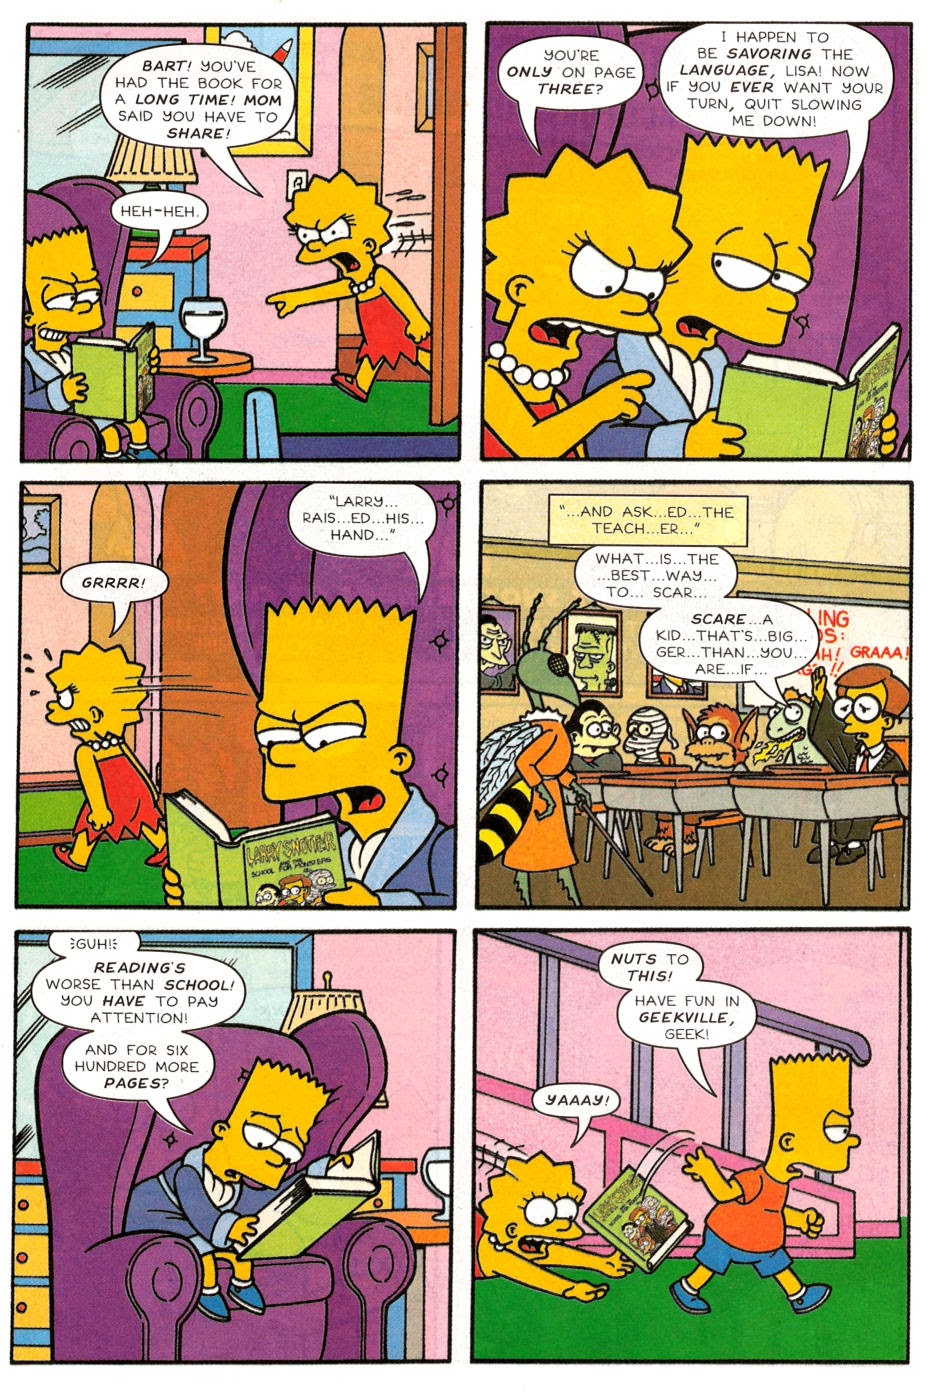 Read online Bart Simpson comic -  Issue #30 - 5